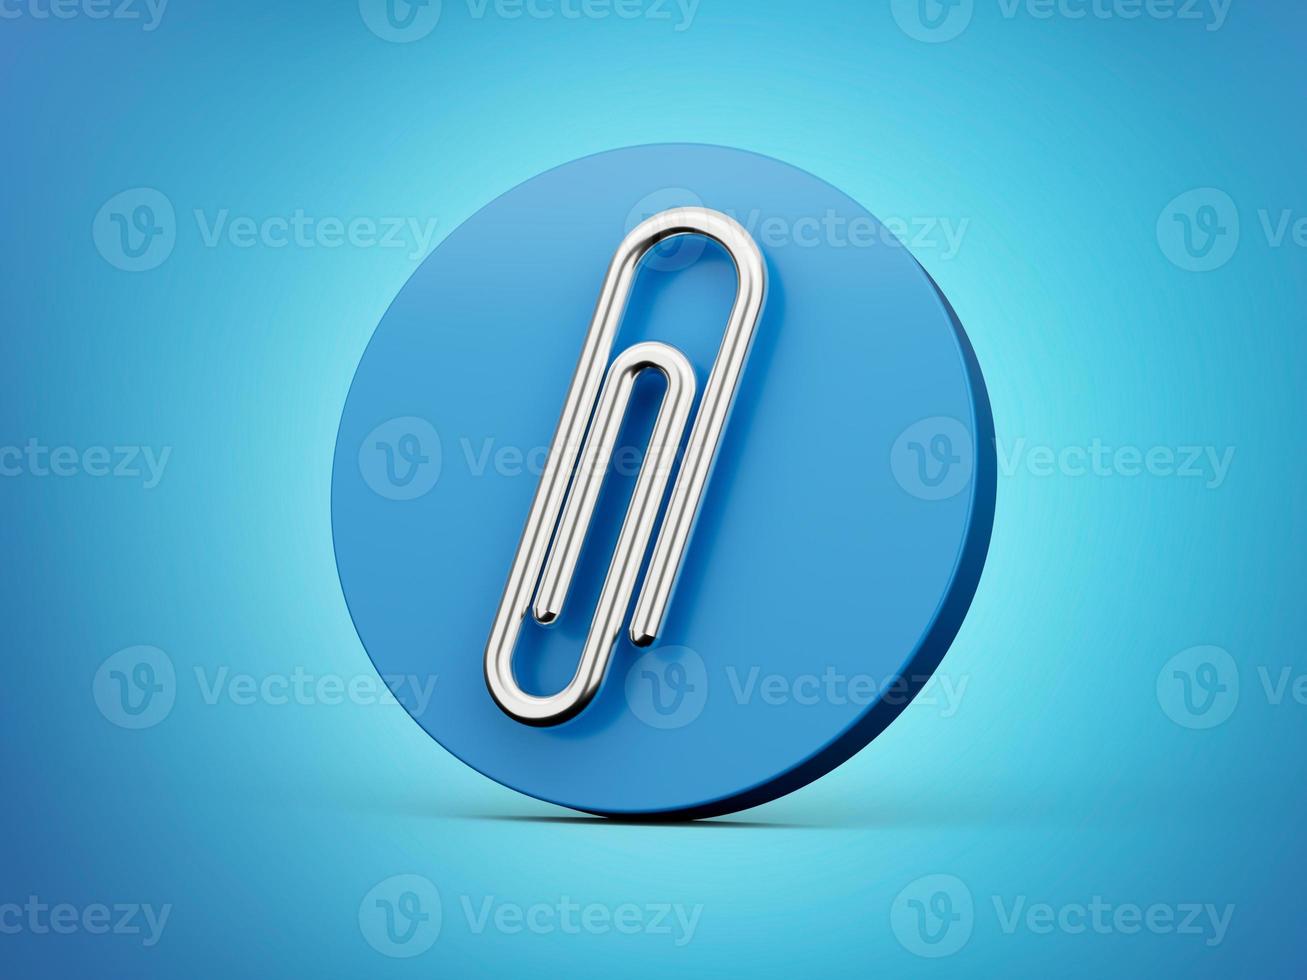 Paper clip. 3d Metal symbol in the Blue circle. 3d illustration icon photo